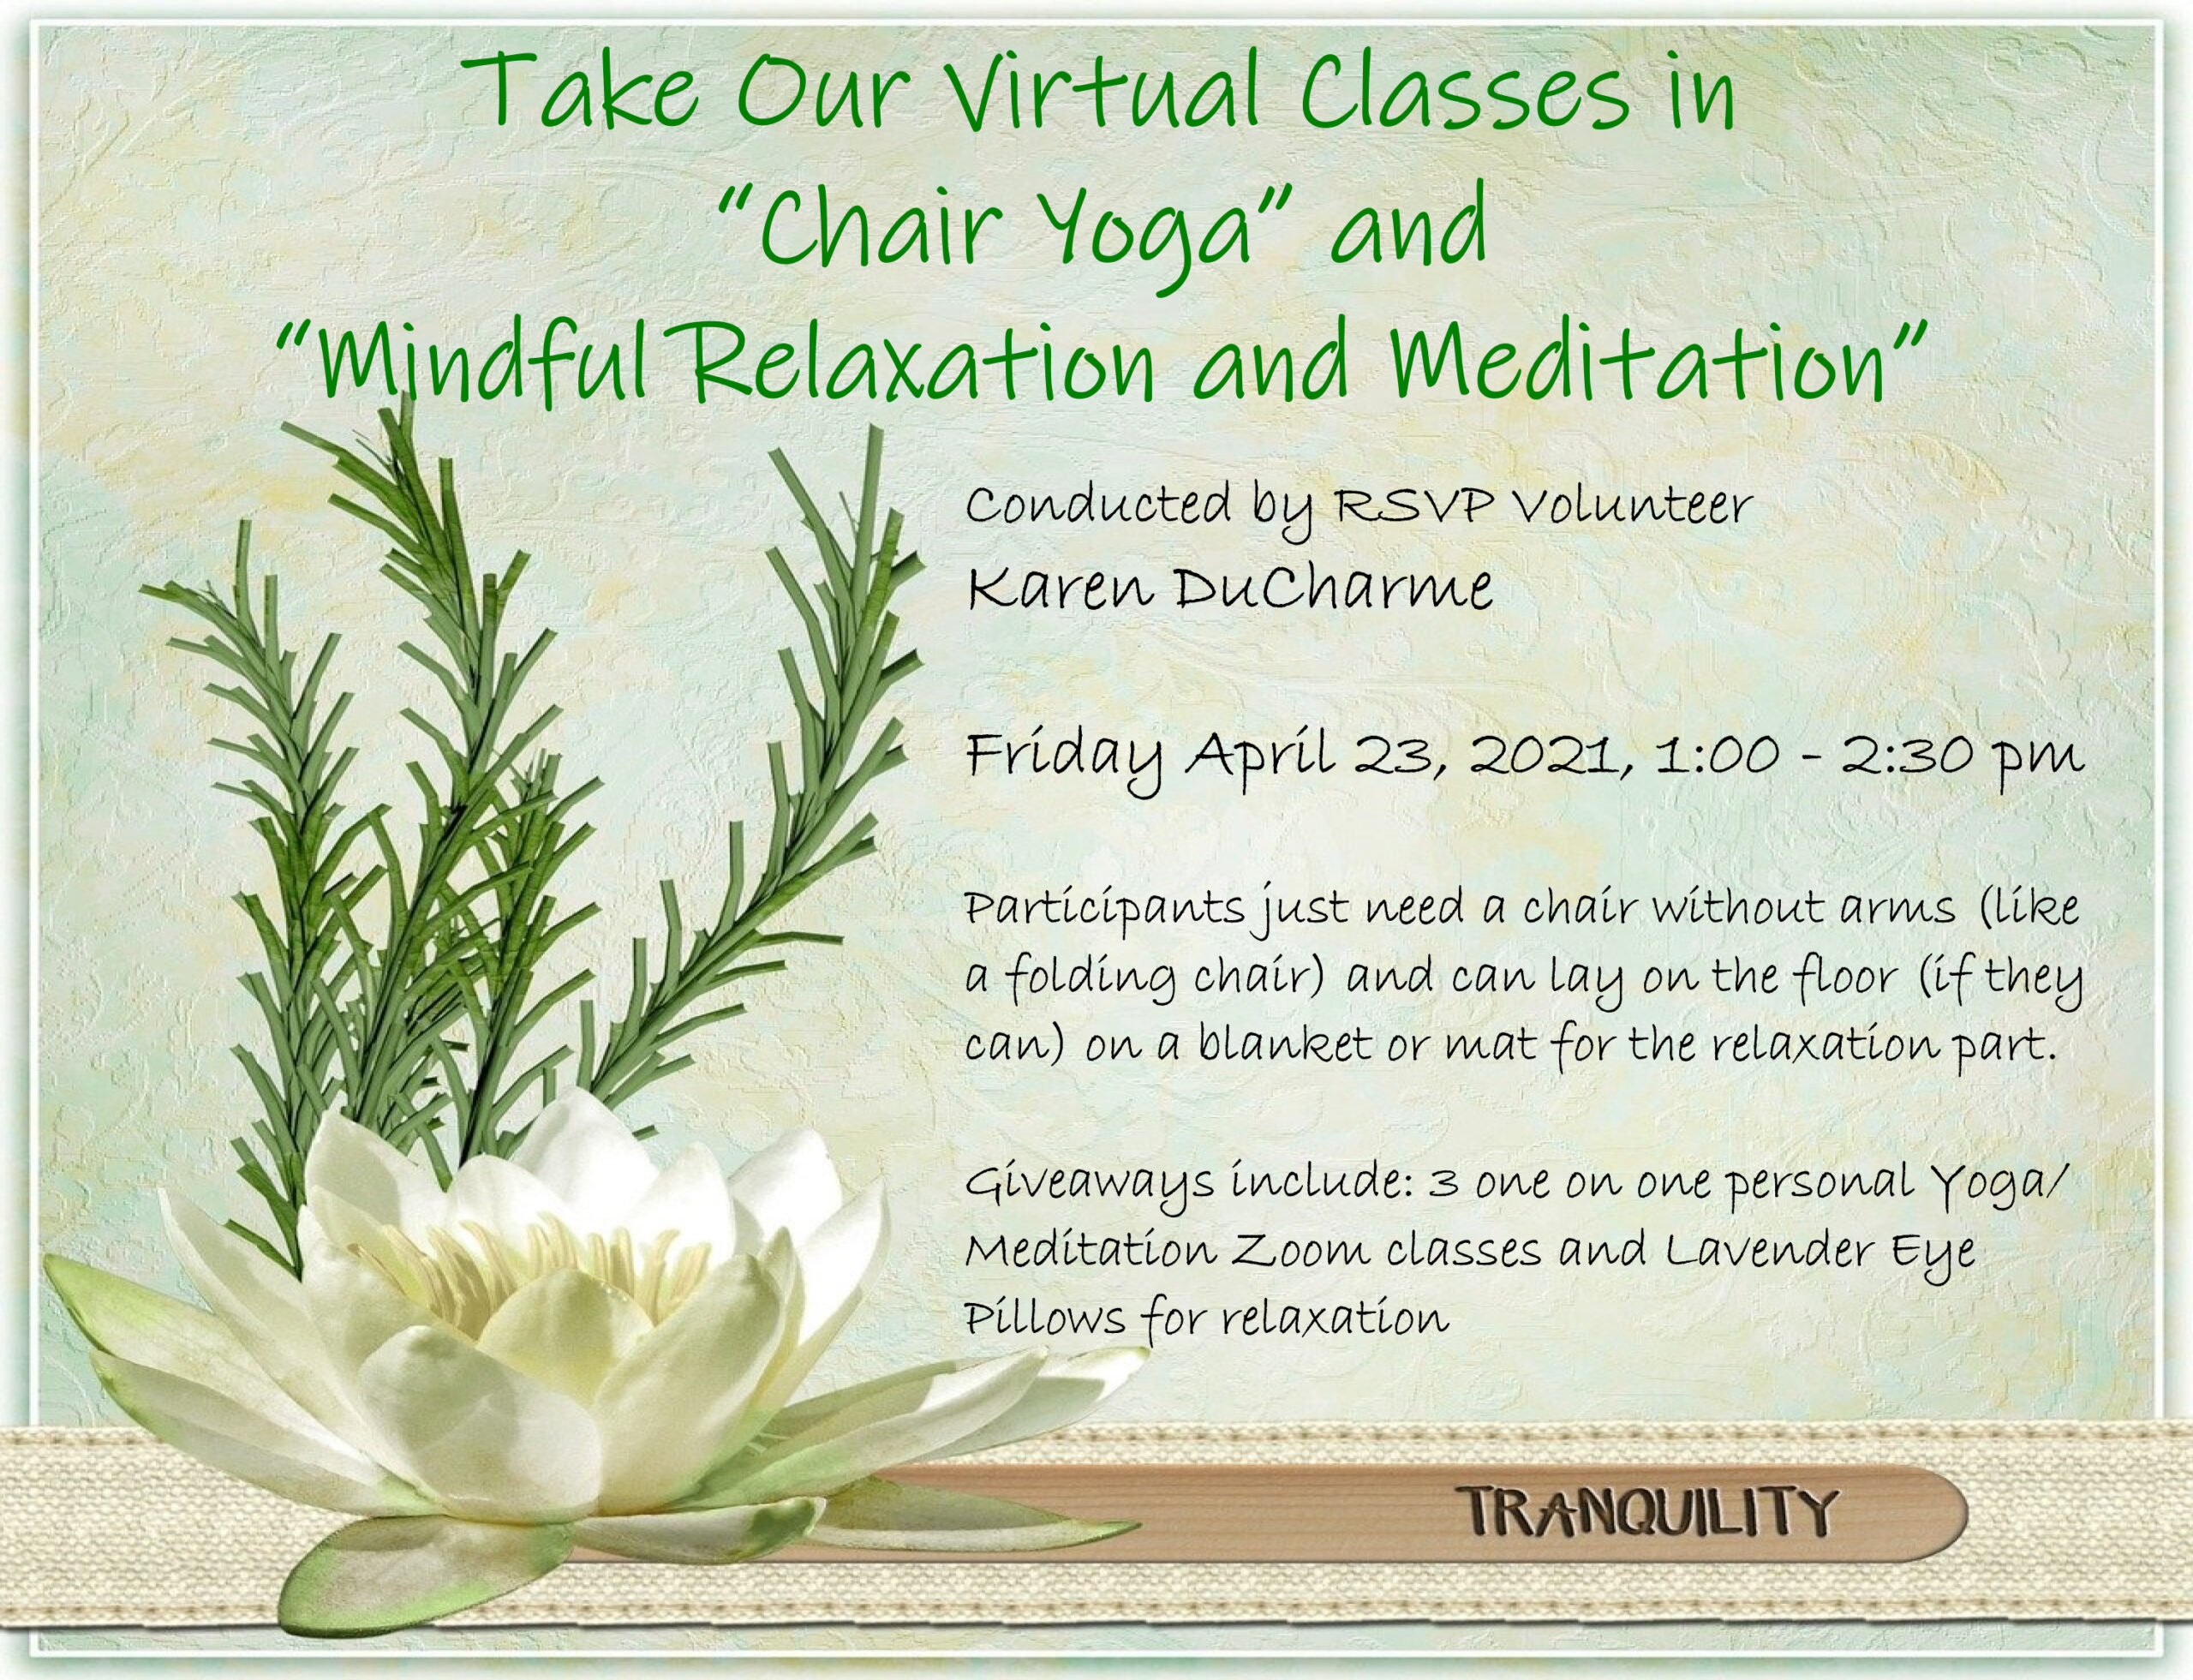 Invitation to a virtual session of chair yoga